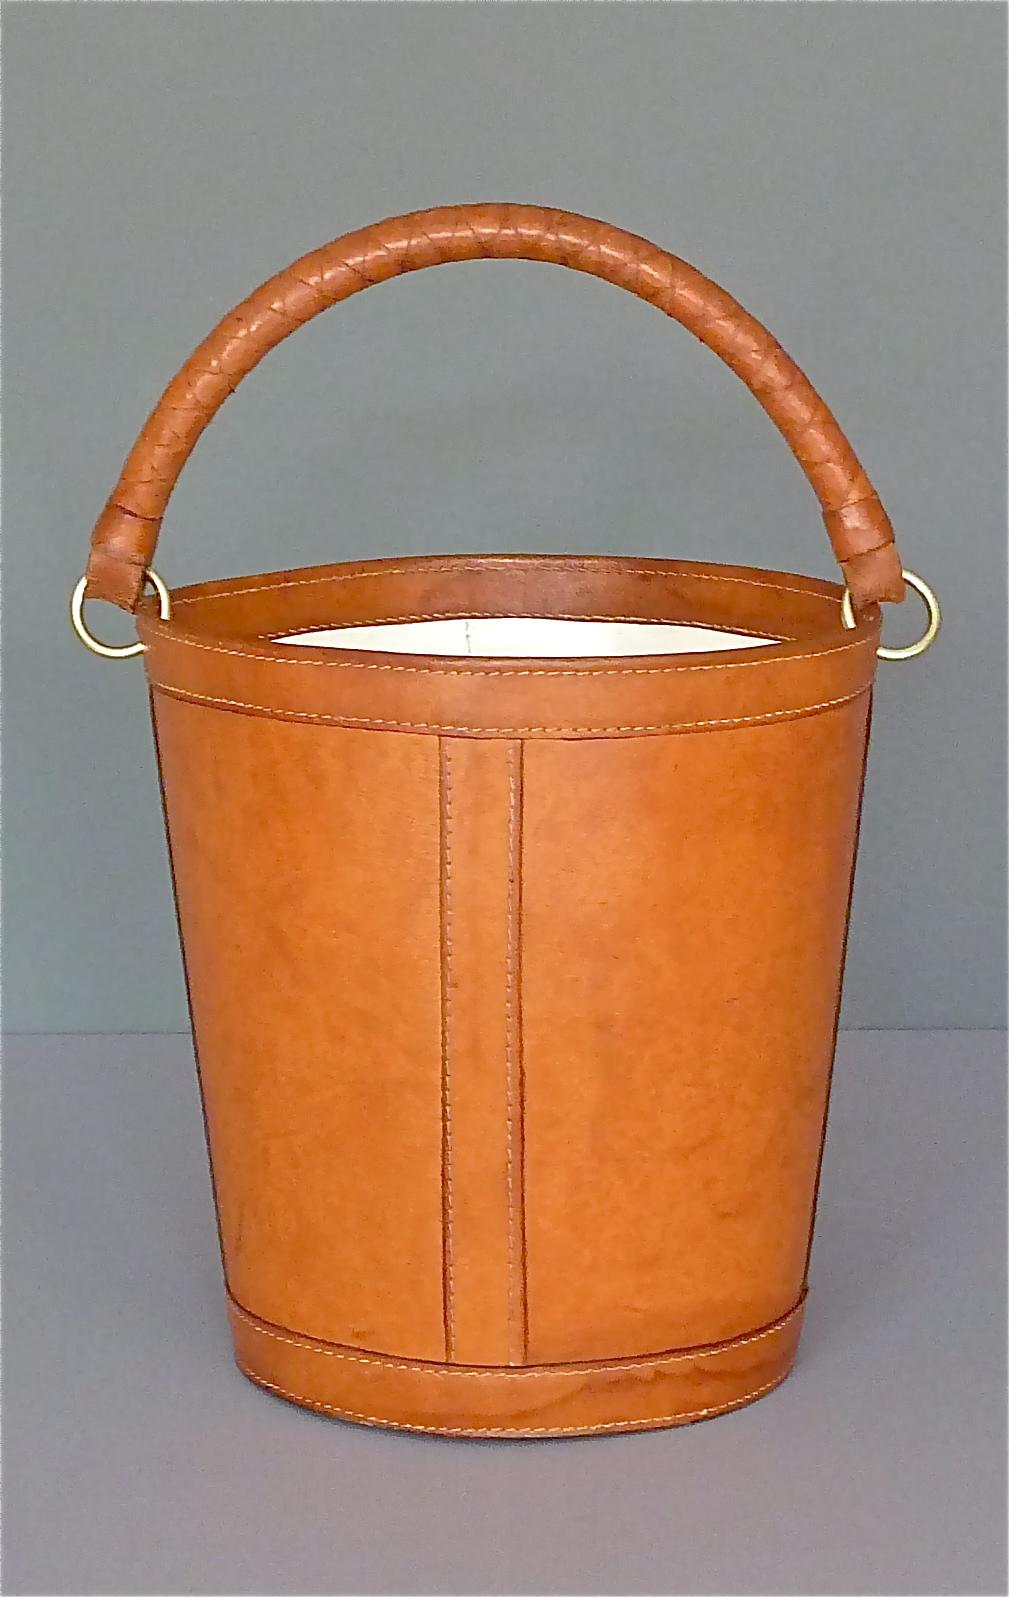 Beautiful midcentury patinated leather brass paper basket / office waste bin made in the 1950s-1960s by Illums Bolighus, Copenhagen, Denmark. The naturally aged basket is made of hand-stitched brown thick leather with an off-white plastic inlay and